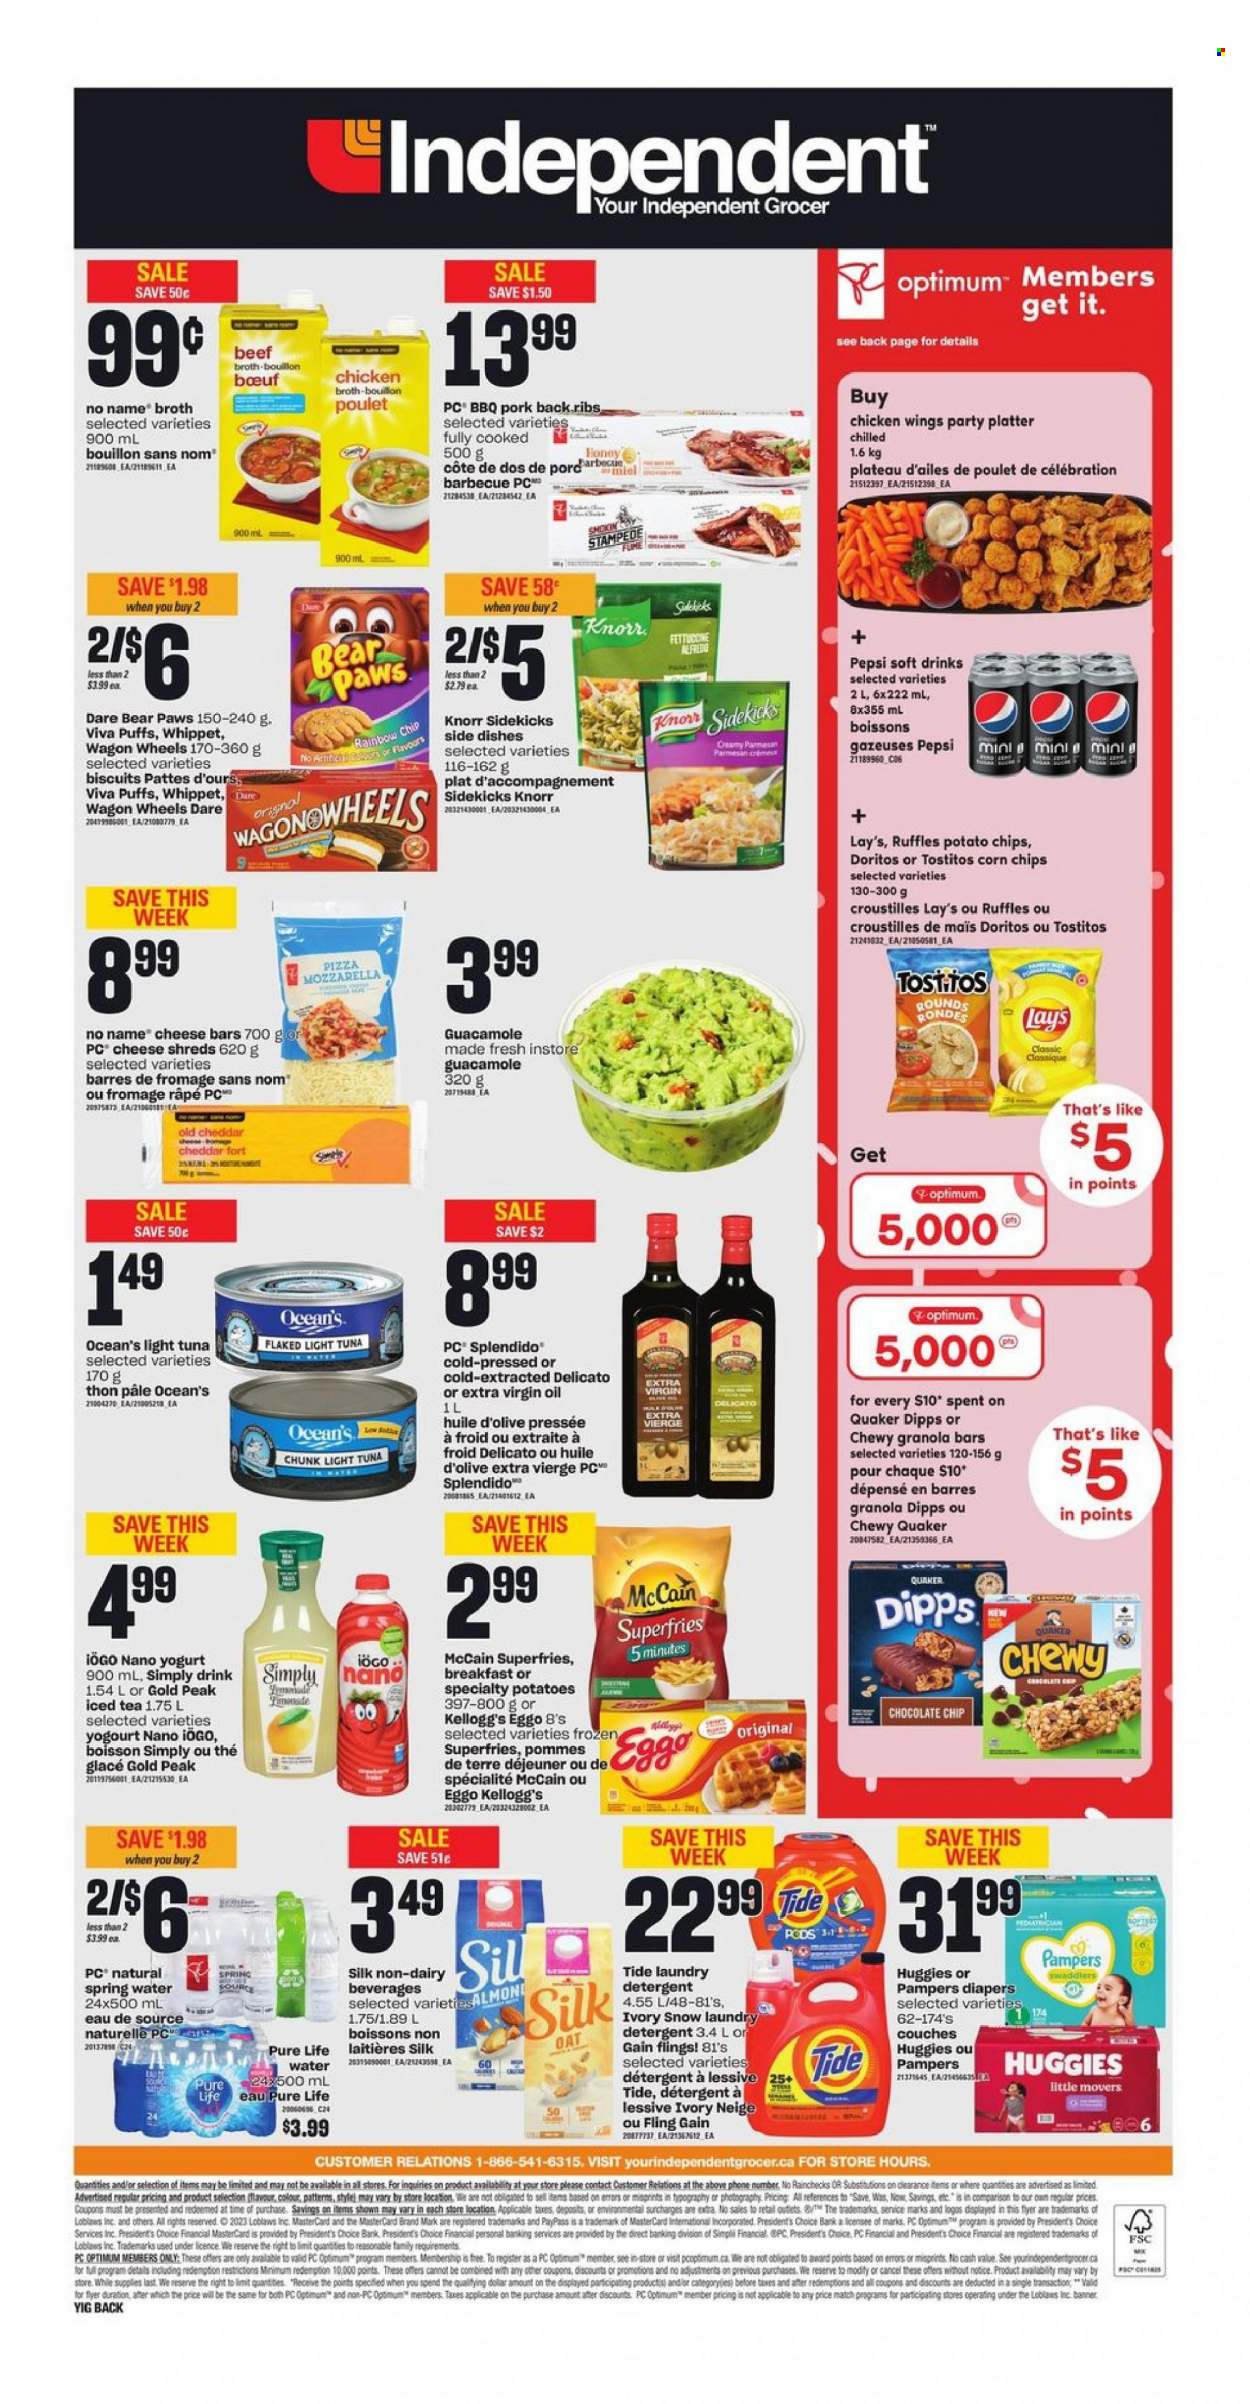 thumbnail - Independent Flyer - February 02, 2023 - February 08, 2023 - Sales products - puffs, tuna, No Name, pizza, Quaker, guacamole, parmesan, yoghurt, Silk, chicken wings, McCain, potato fries, Celebration, Kellogg's, biscuit, Doritos, potato chips, Lay’s, corn chips, Ruffles, Tostitos, beef broth, bouillon, chicken broth, oats, broth, tuna in water, light tuna, granola bar, extra virgin olive oil, oil, Pepsi, ice tea, soft drink, spring water, Pure Life Water, ribs, Pampers, nappies, Gain, Tide, laundry detergent, Paws, Optimum, rode, wagon, detergent, Huggies, Knorr. Page 3.